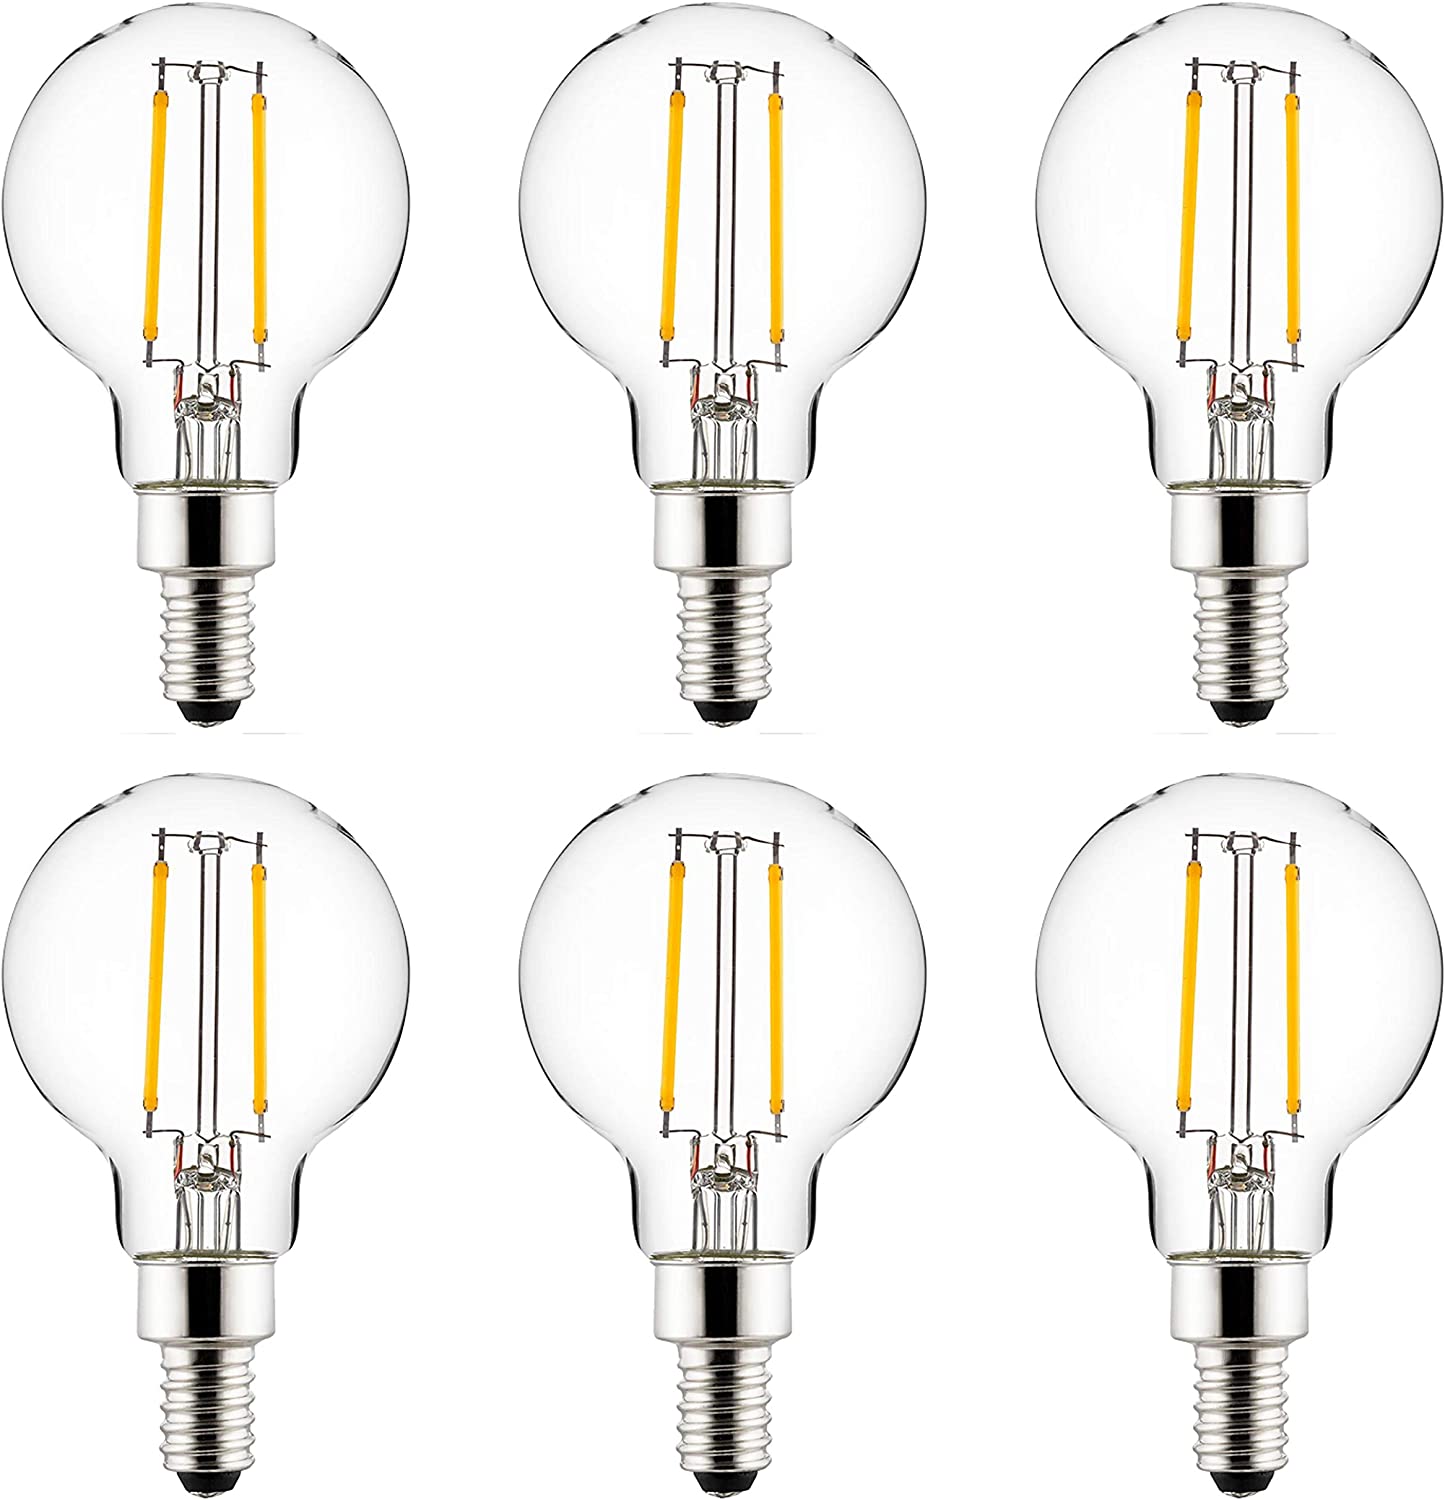 Sunlite 40959-SU LED G16.5 Filament Style Globe Light Bulb, 2.5 Watts (25W Equivalent), 250 lumens, Dimmable, Candelabra Base (E12), UL Listed, 3000K -Warm White, 6 Pack